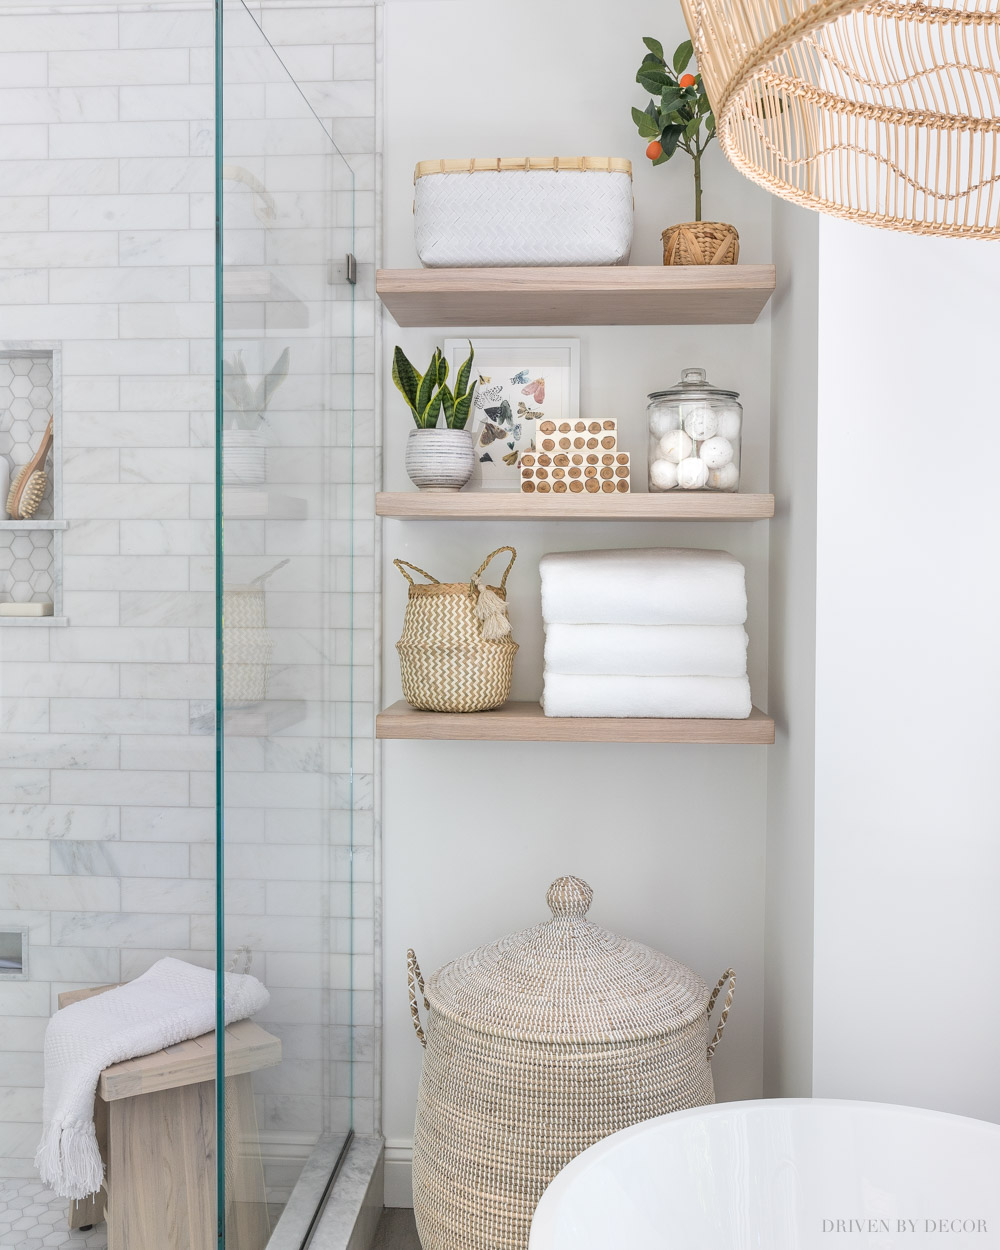 Floating wood shelves add a ton of storage space in small bathrooms